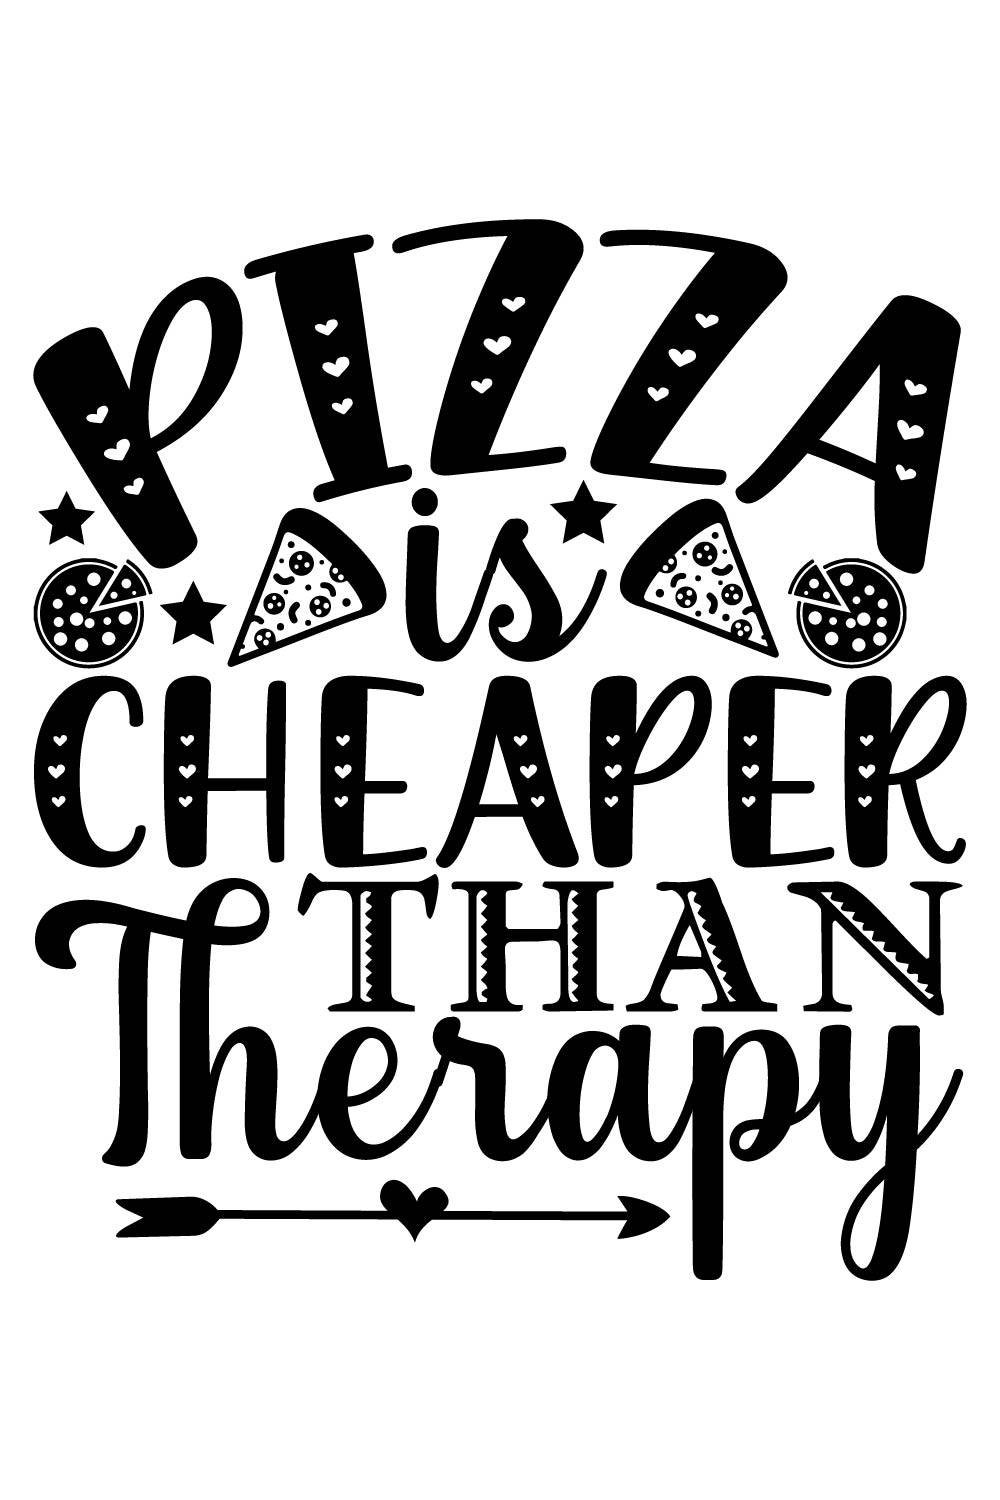 Image with a wonderful inscription Pizza is cheaper than therapy.